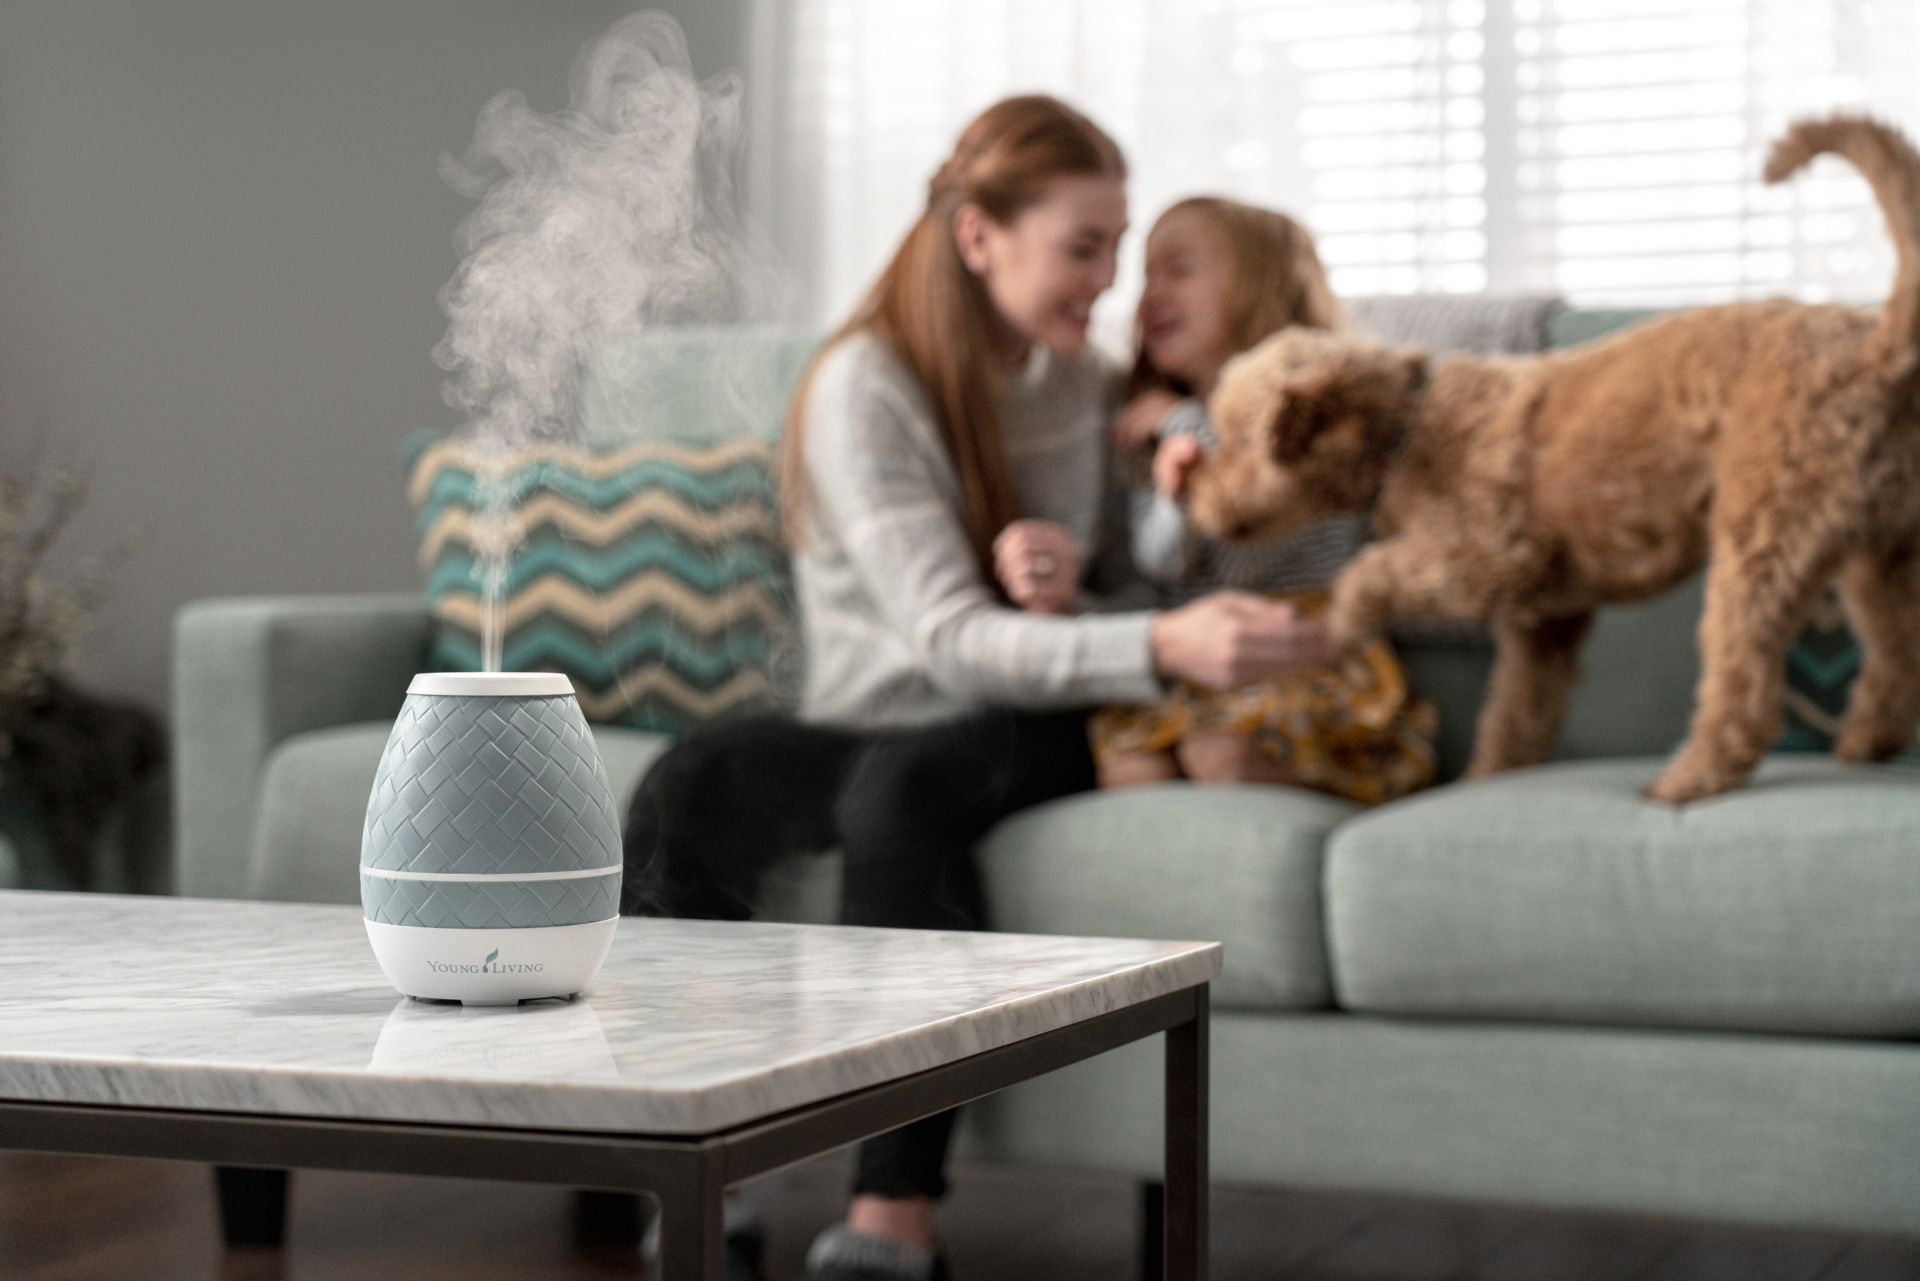 Sweet Aroma Diffuser in the living room with family